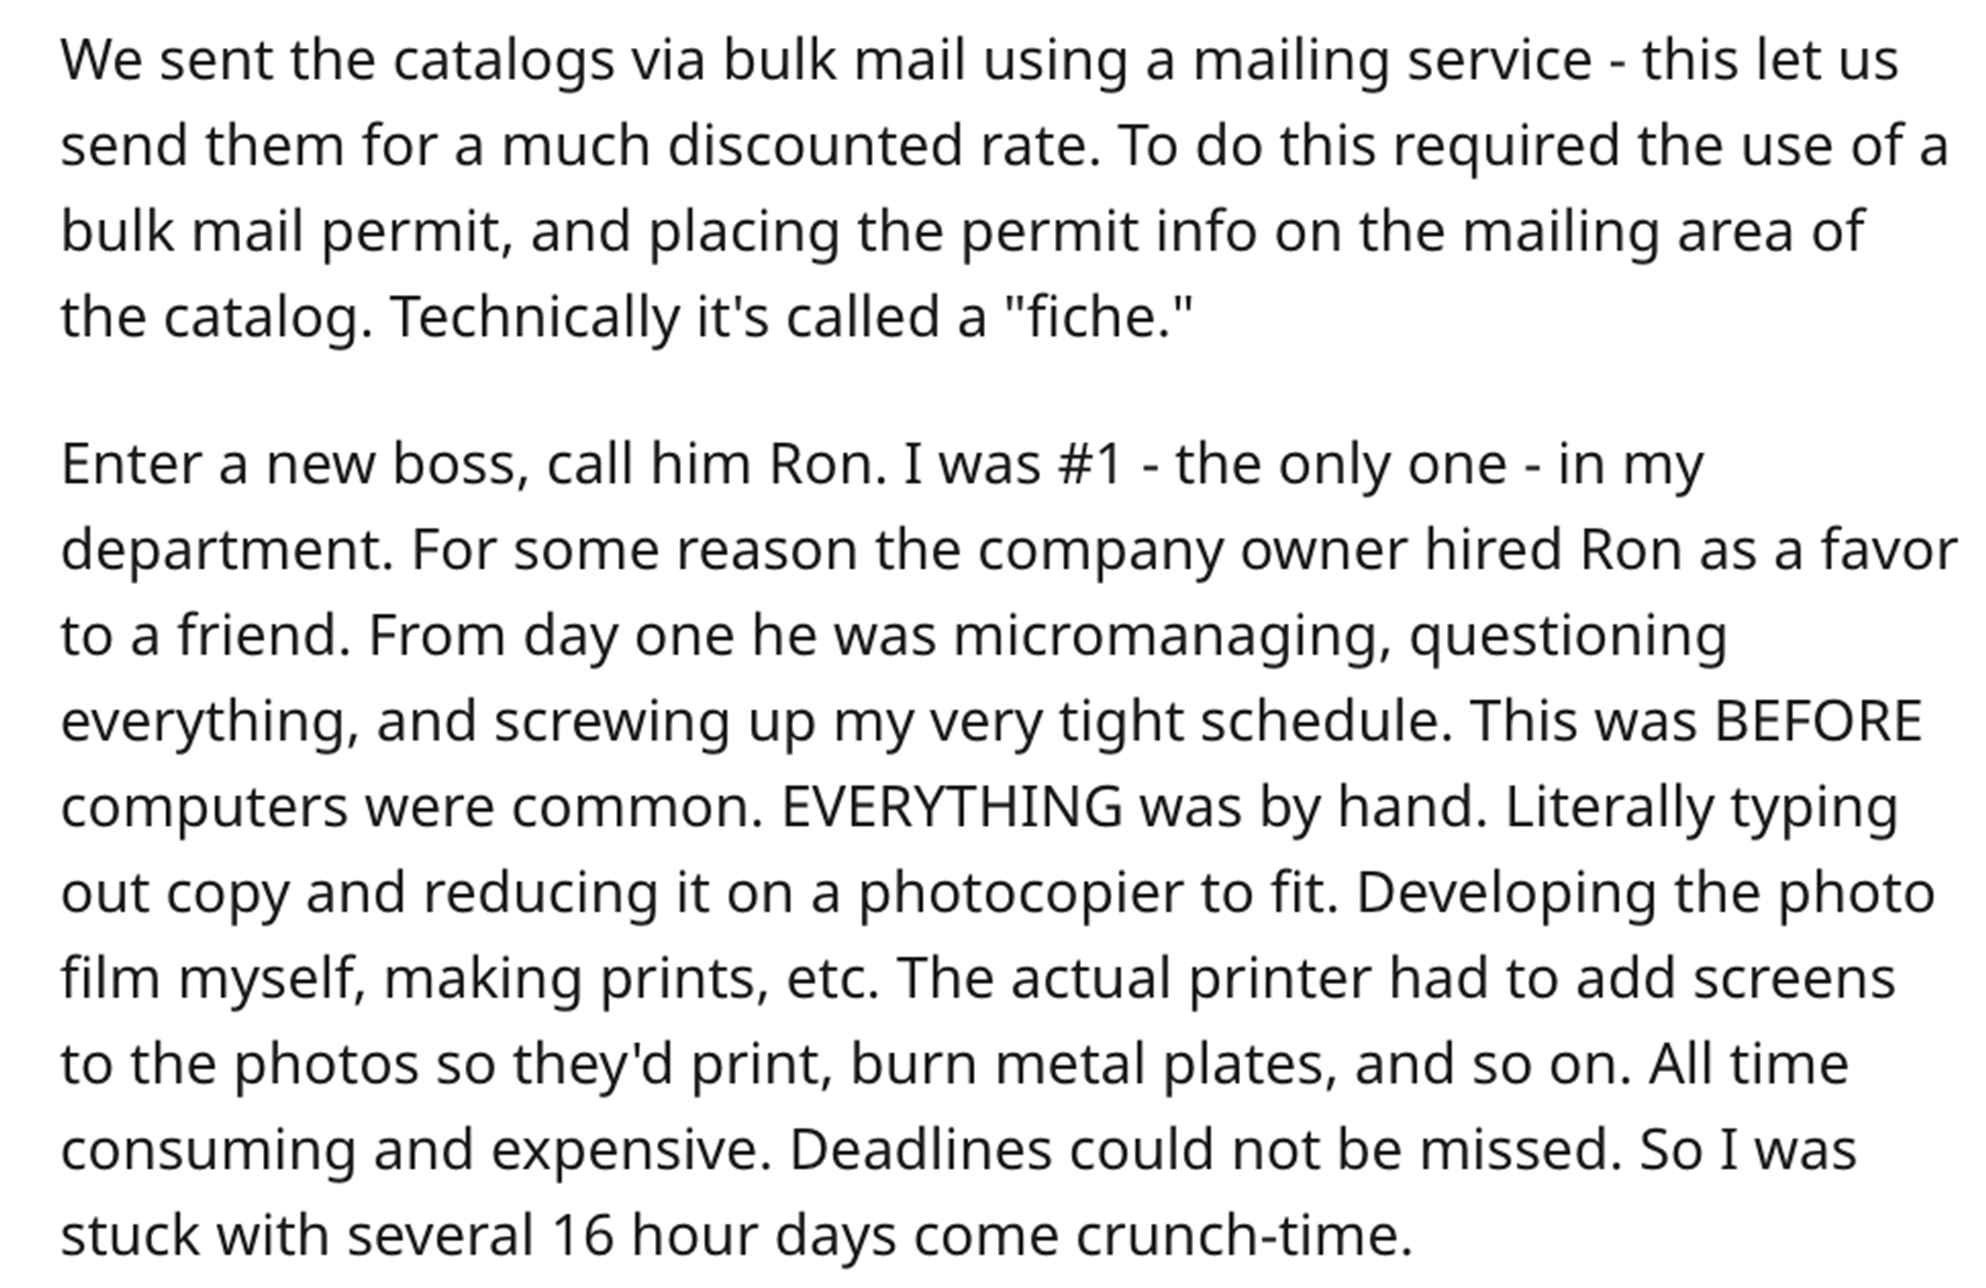 Entitled Boss gets fired - Color - We sent the catalogs via bulk mail using a mailing service this let us send them for a much discounted rate. To do this required the use of a bulk mail permit, and placing the permit info on the mailing area of the catal